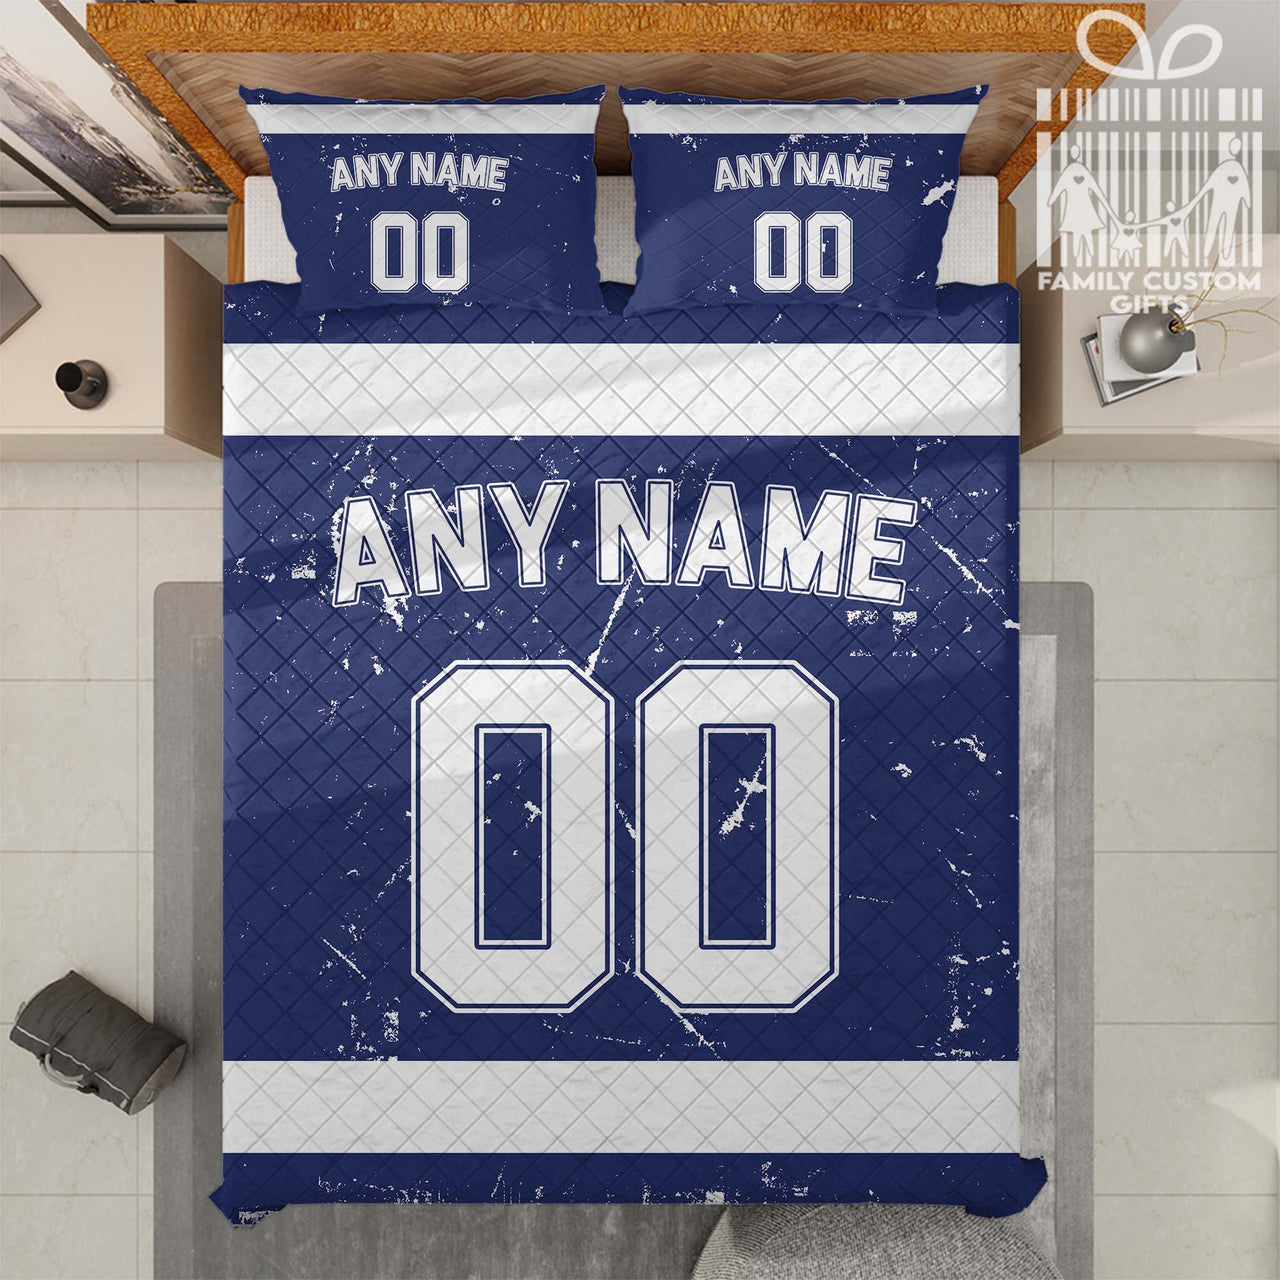 Custom Quilt Sets Tampa Bay Jersey Personalized Ice hockey Premium Quilt Bedding for Men Women